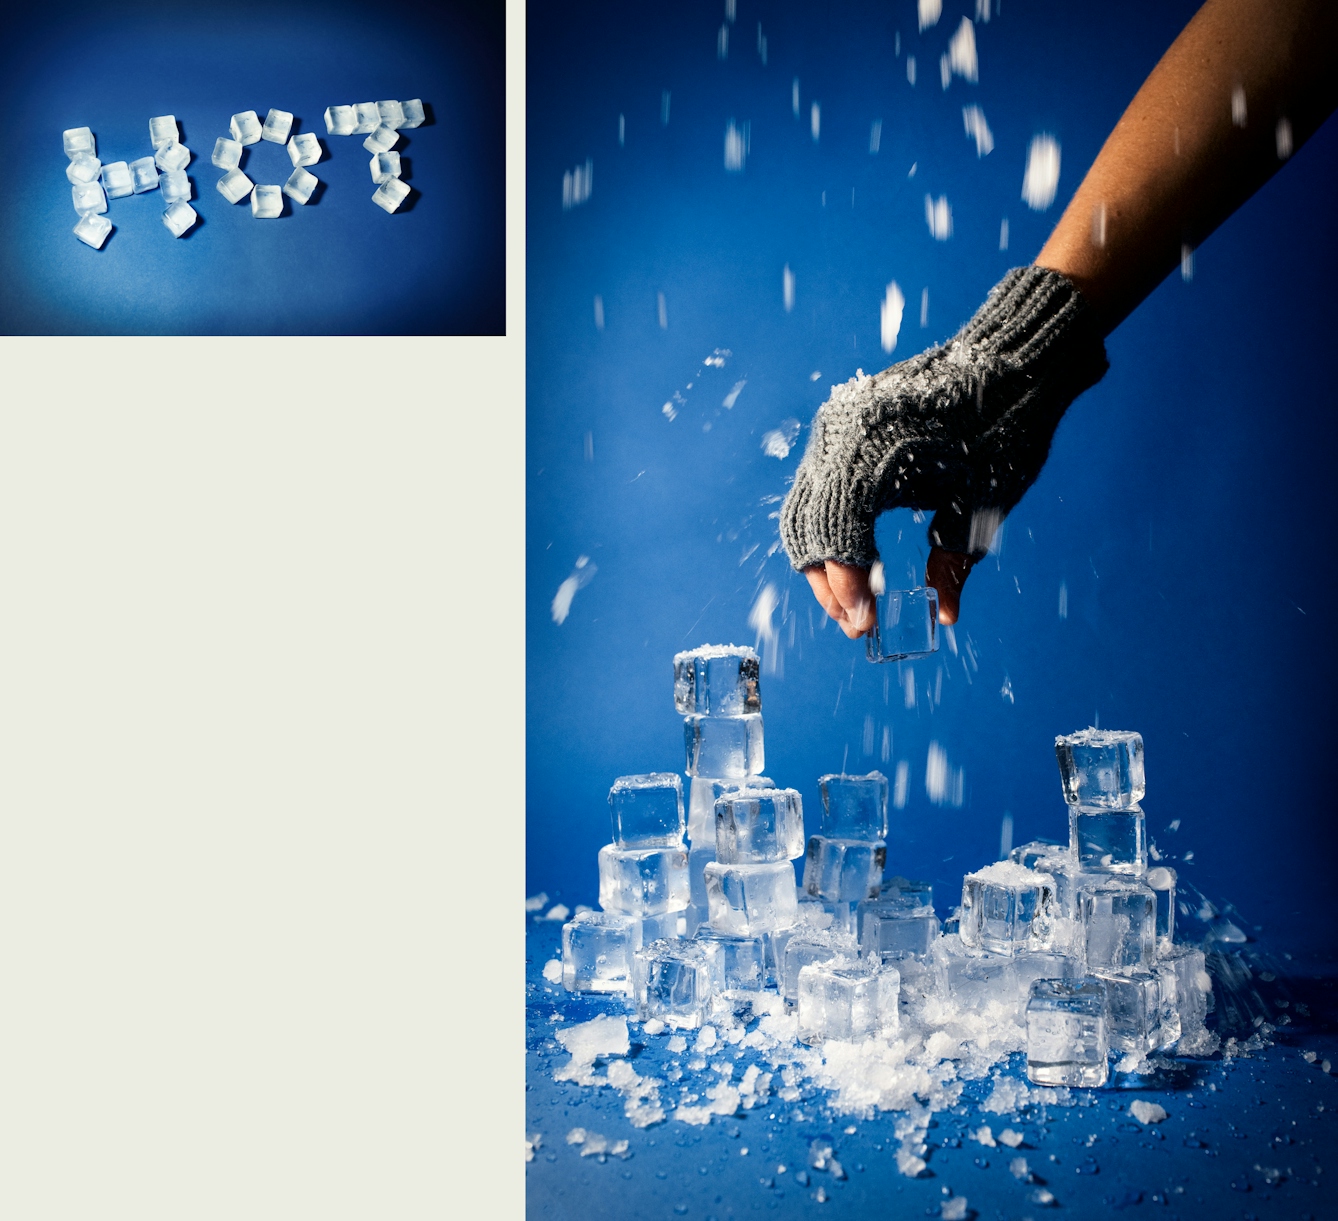 Photographic diptych, one large vertical image on the right and one smaller horizontal image on the left. The one on the right shows a pile of ice cubes, some whole, some crushed, resting on a blue background. Above the pile of ice is an arm and a hand wearing a fingerless woollen glove, holding one of the ice cubes. Showering down onto the hand and the ice are many fragments of ice. The image on the left shows the word 'HOT' spelt out with ice cubes, resting on a blue background.